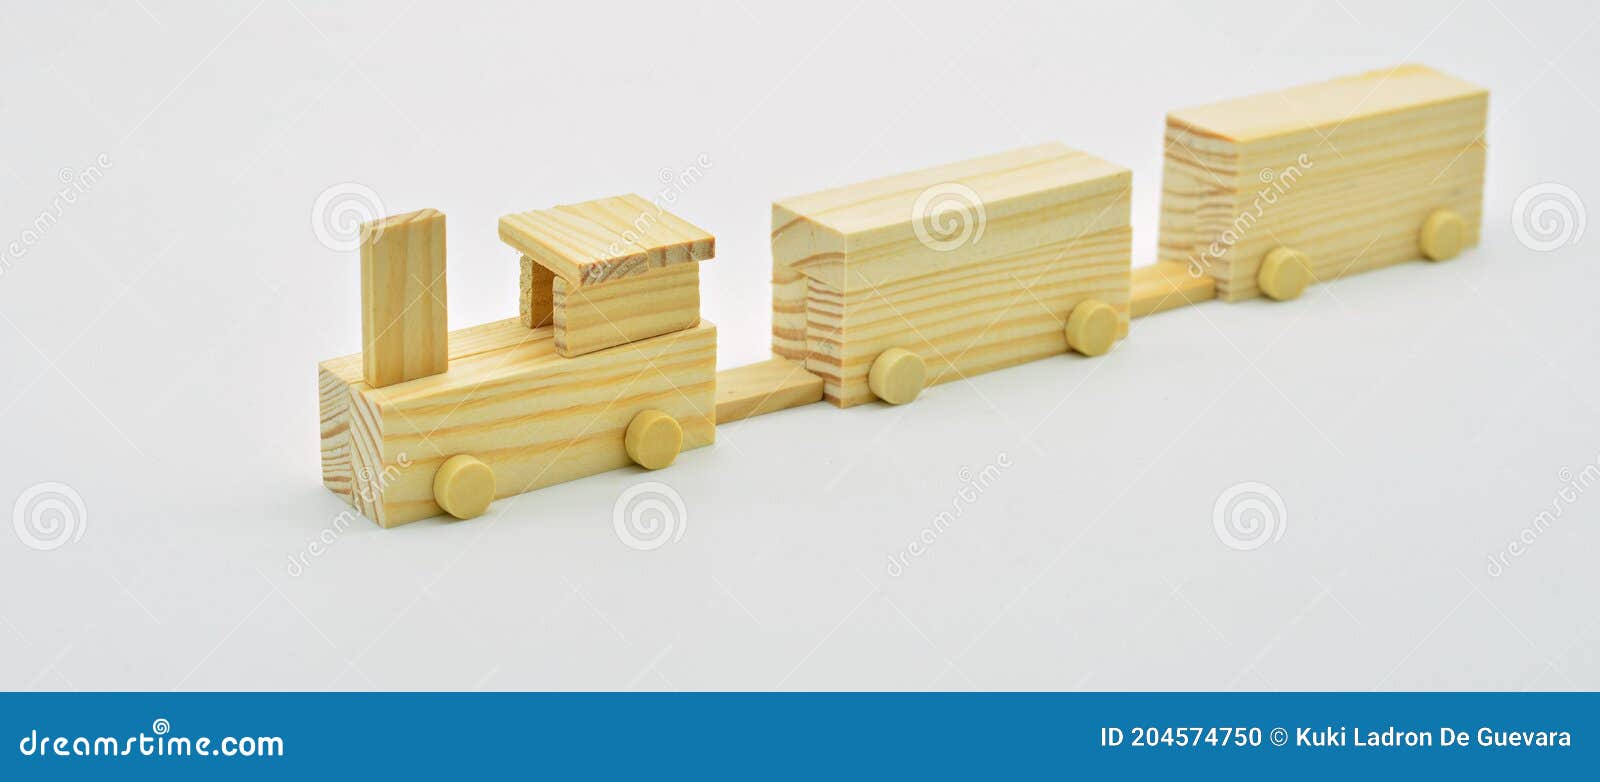 train made with wooden blocks